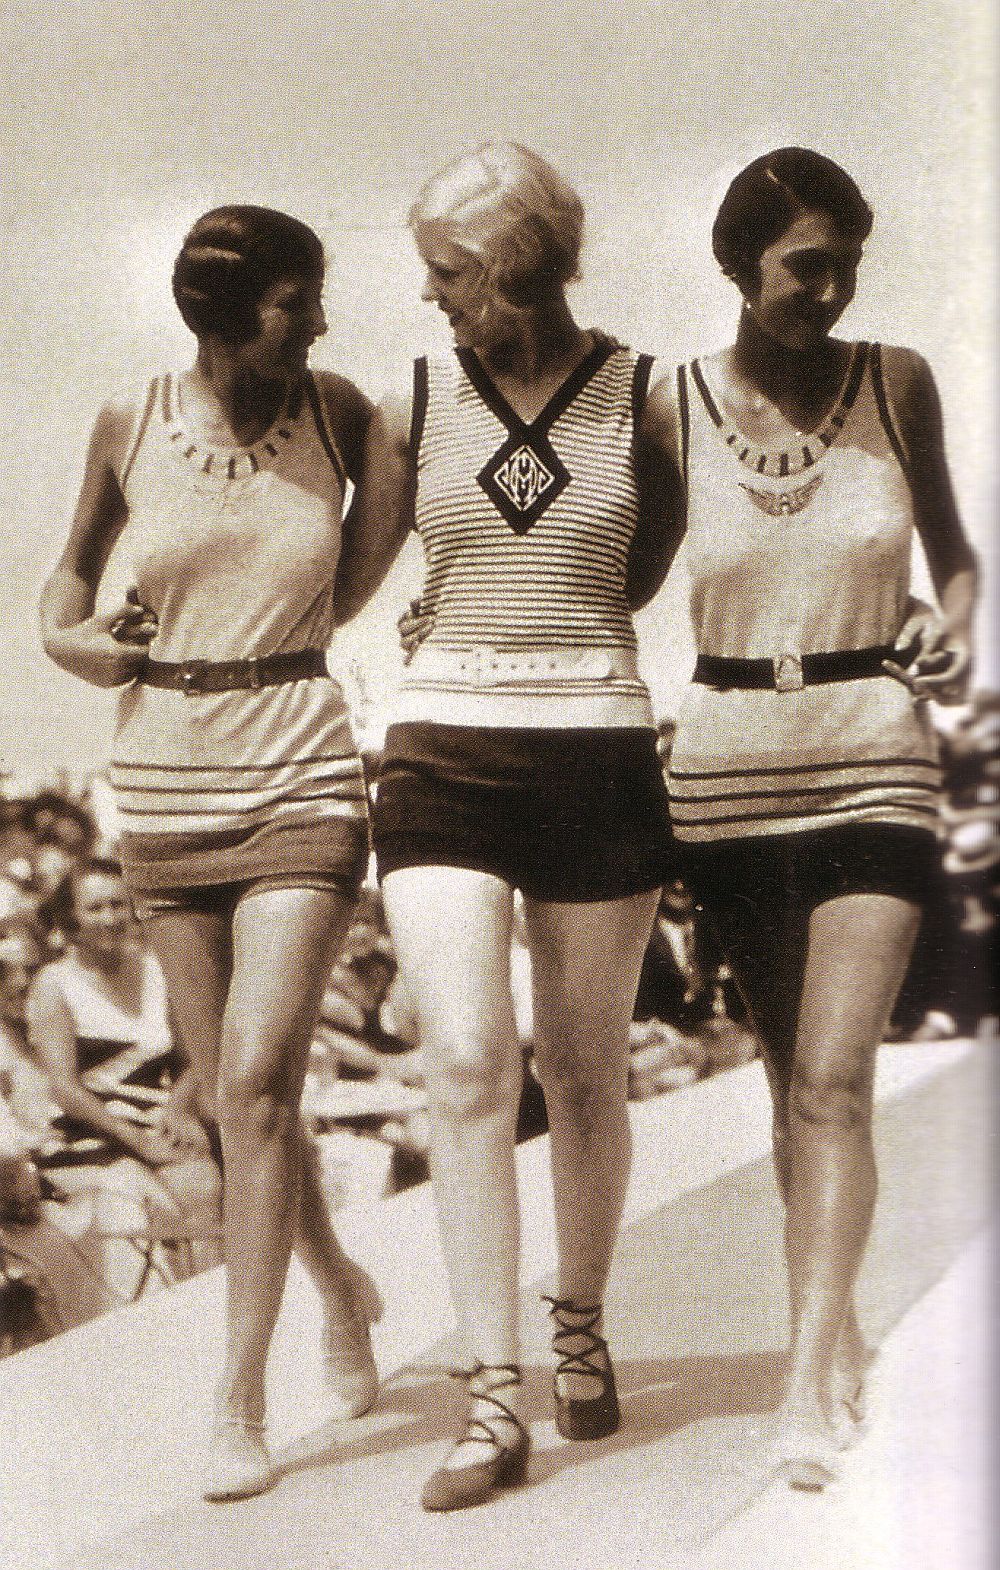 Deauville - The Town where Fashion went on Holiday - Glamour Daze